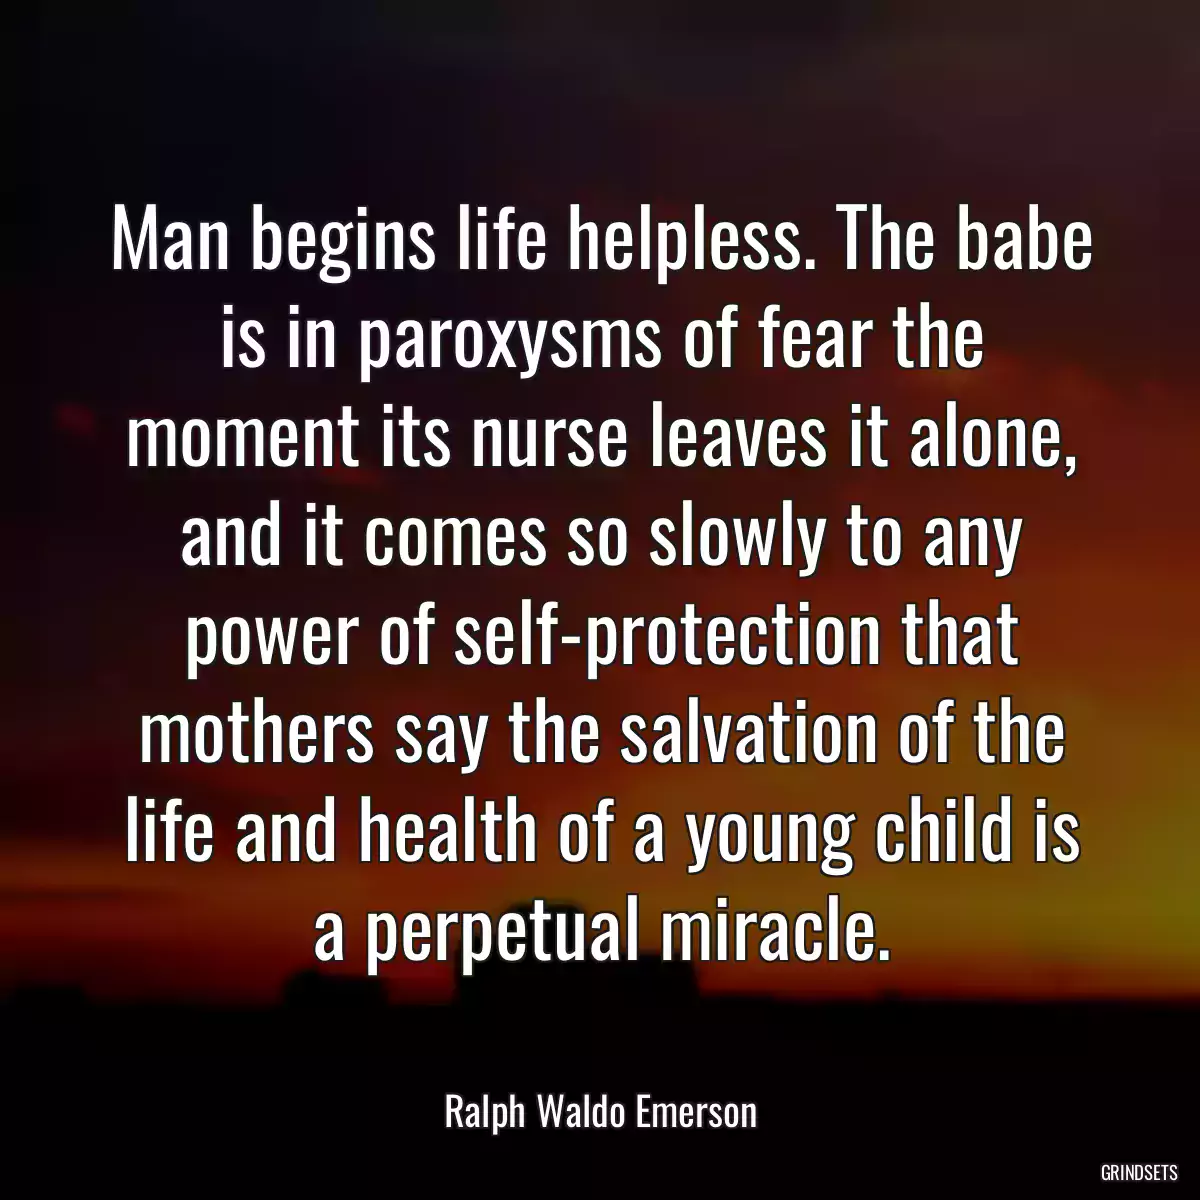 Man begins life helpless. The babe is in paroxysms of fear the moment its nurse leaves it alone, and it comes so slowly to any power of self-protection that mothers say the salvation of the life and health of a young child is a perpetual miracle.